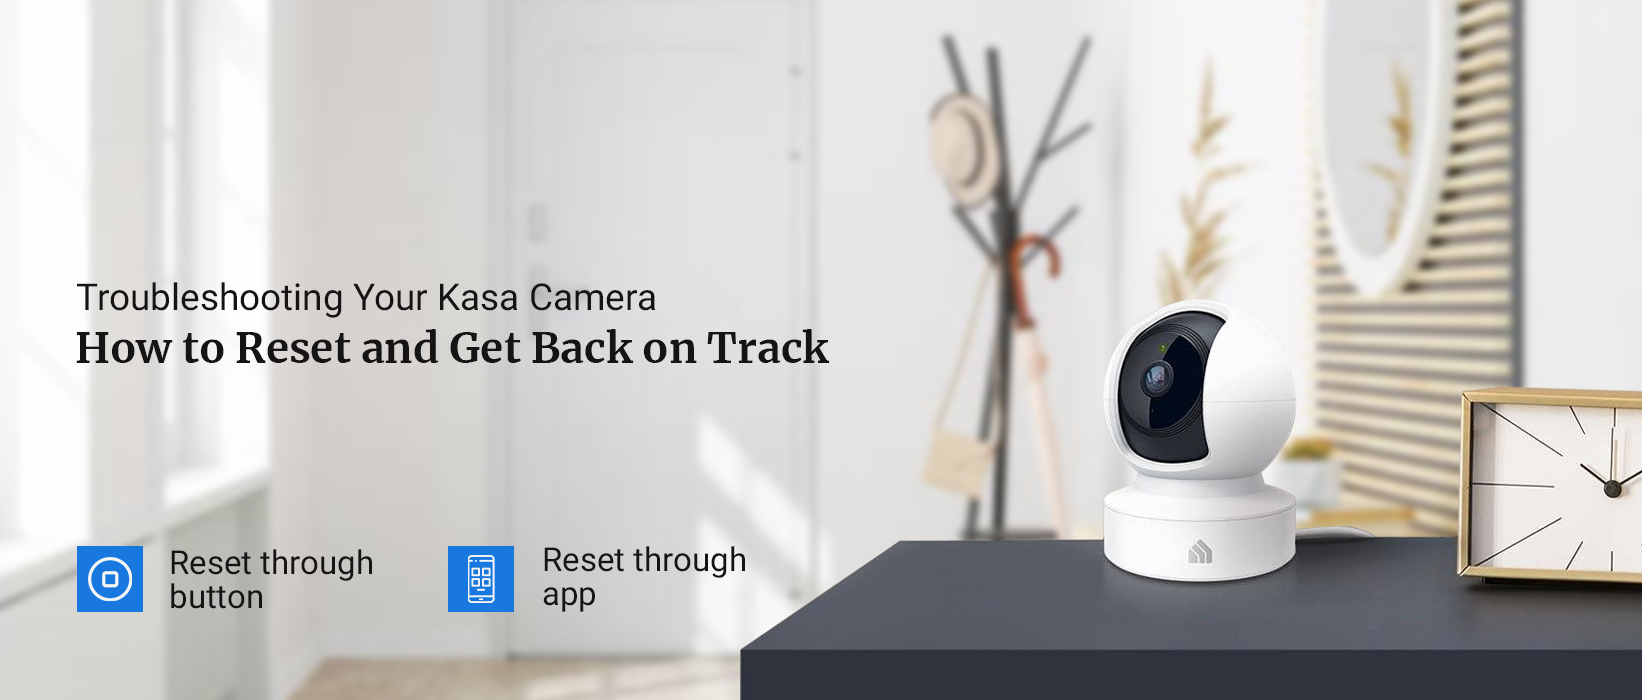 How to reset the kasa camera